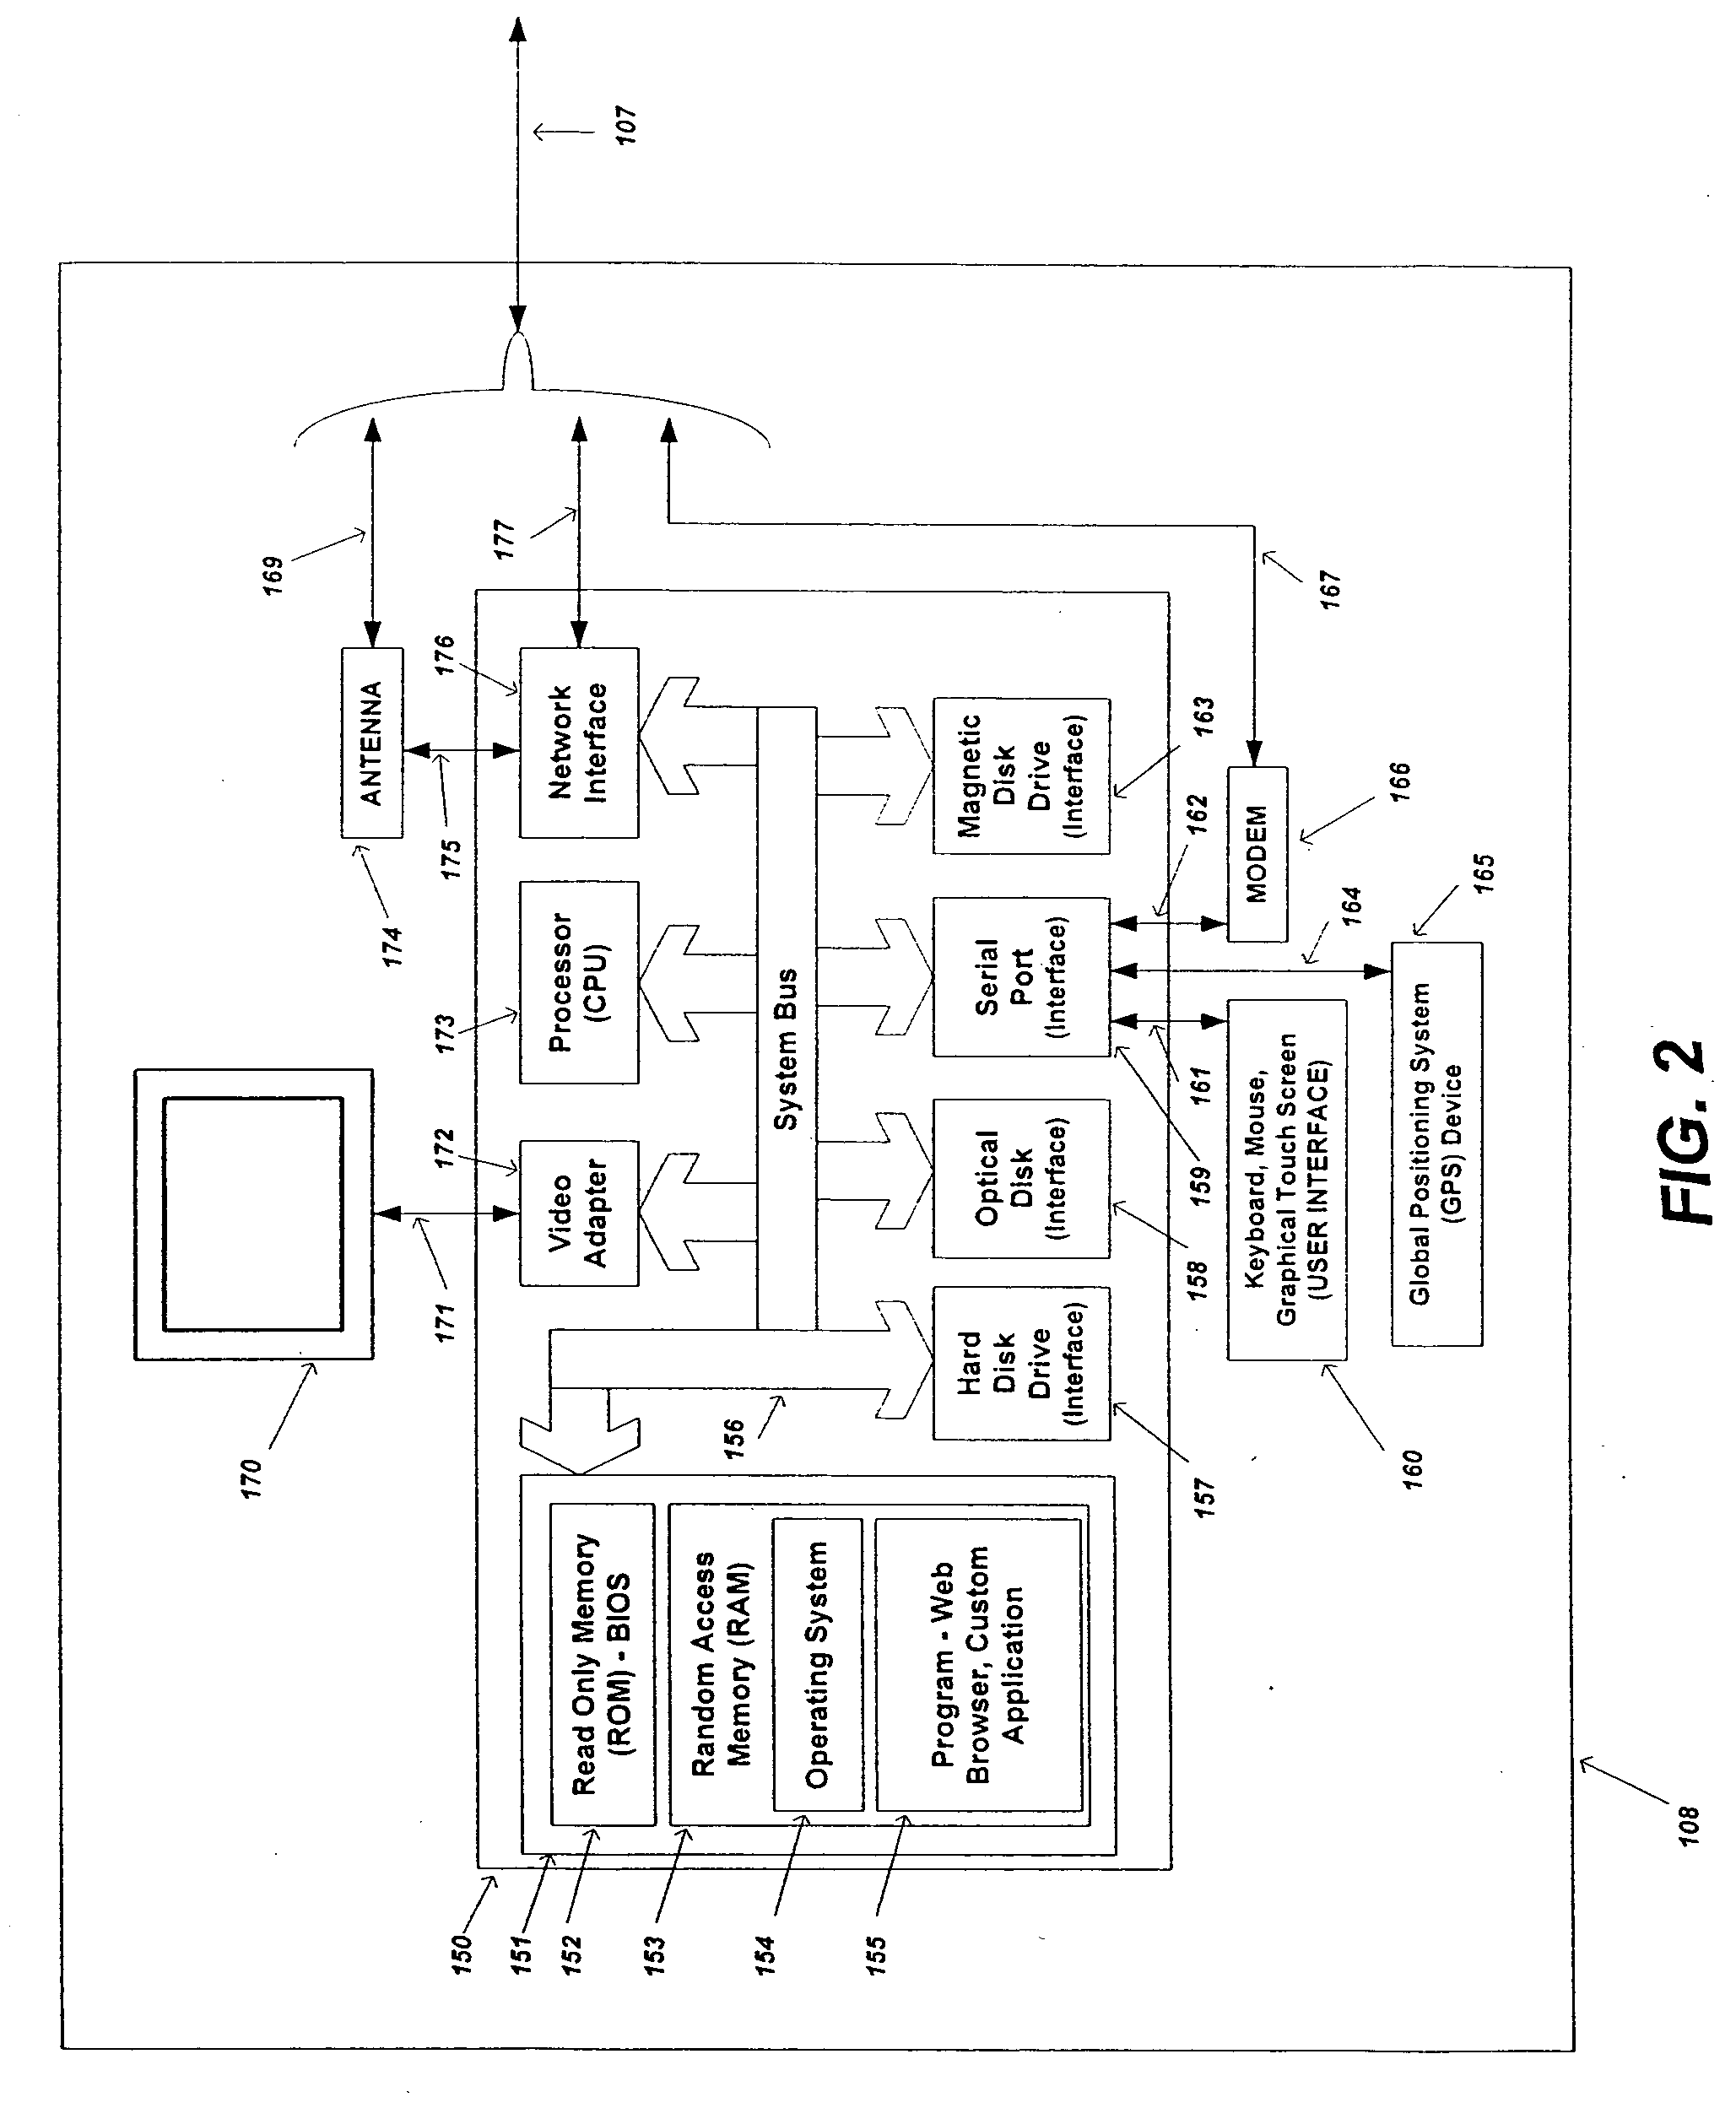 Method and system for enabling an off board navigation solution